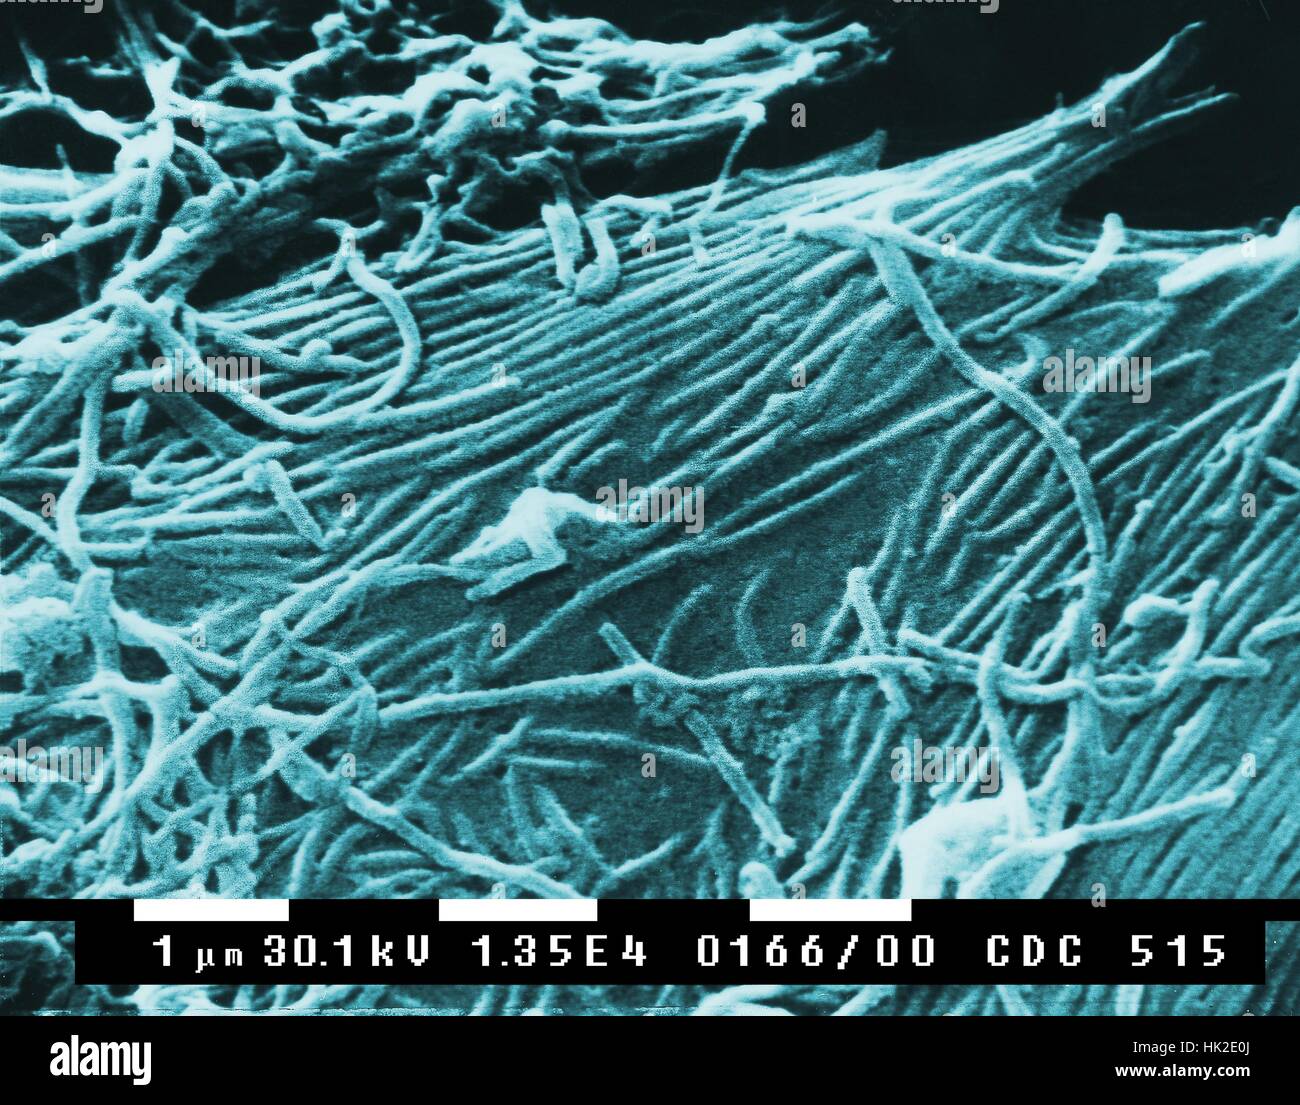 This scanning electron micrograph (SEM) depicts numbers of Ebola virions. Ebola is a severe, often-fatal disease in humans and nonhuman primates (monkeys, gorillas, and chimpanzees) that has appeared sporadically since its initial recognition in 1976. The disease is caused by infection with Ebola virus, named after a river in the Democratic Republic of the Congo (formerly Zaire) in Africa, where it was first recognized. The virus is one of two members of a family of RNA viruses called the Filoviridae. There are four identified subtypes of Ebola virus. Three of the four have caused disease in h Stock Photo